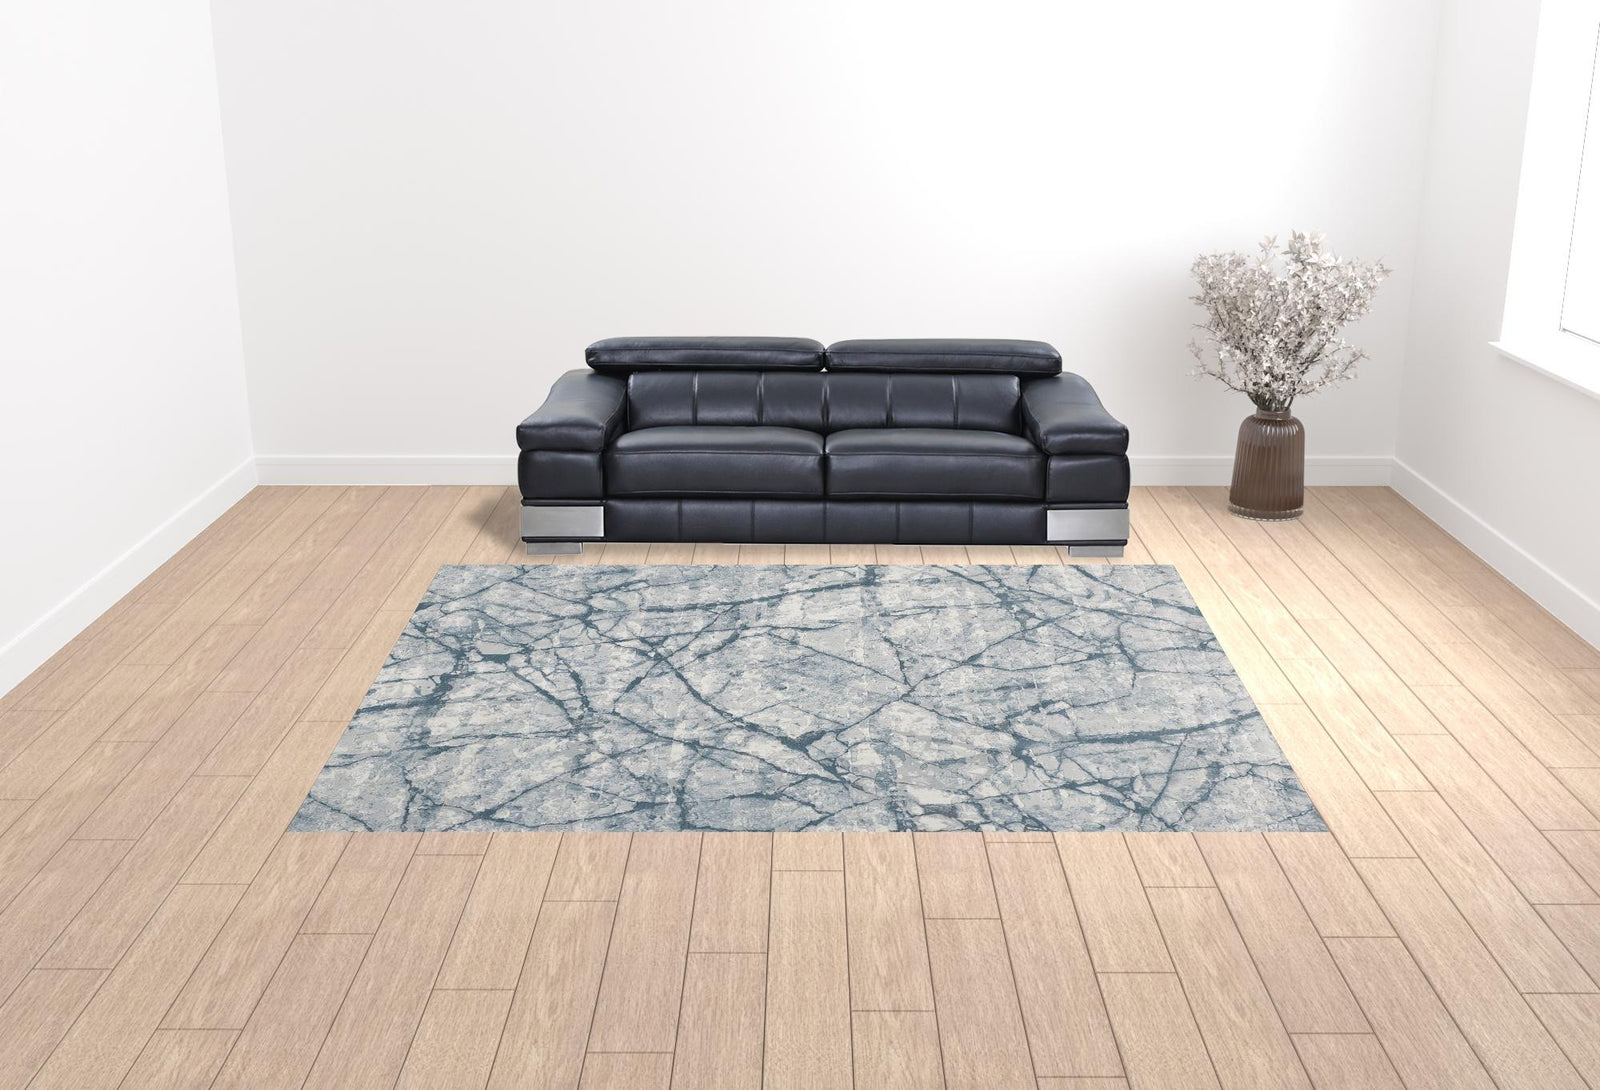 3' X 5' Blue Gray And Ivory Abstract Distressed Stain Resistant Area Rug